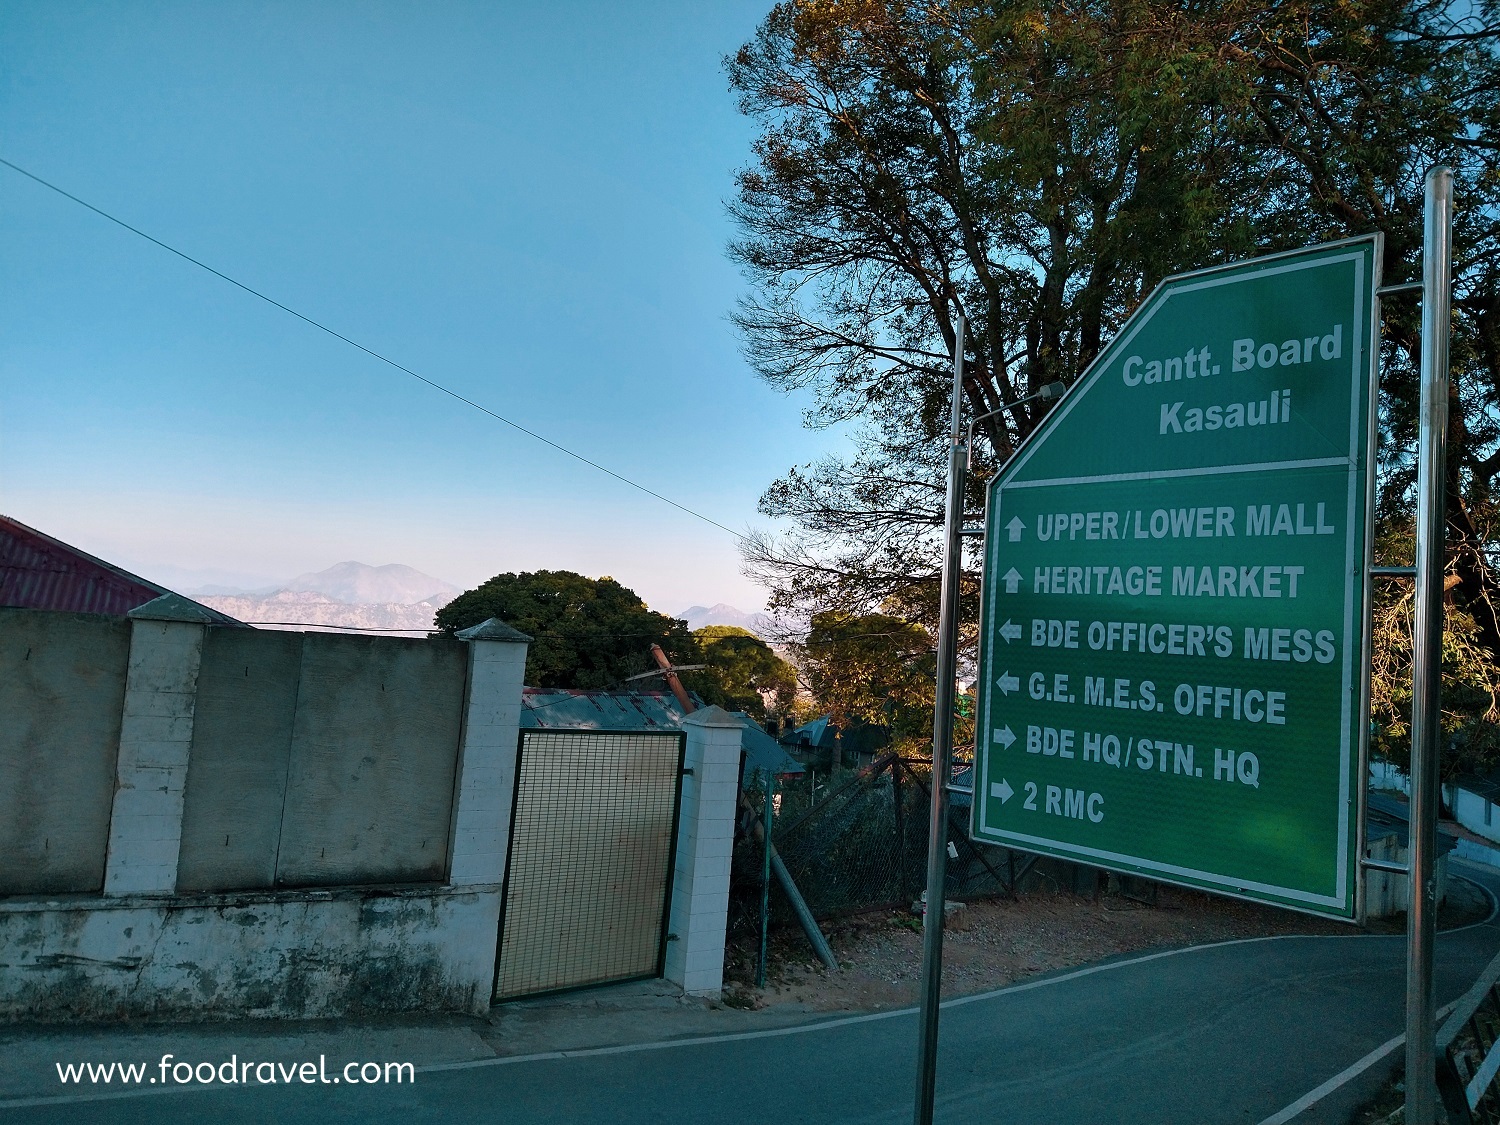 A Weekend Trip to Kasauli – Embracing the Nature and Serenity